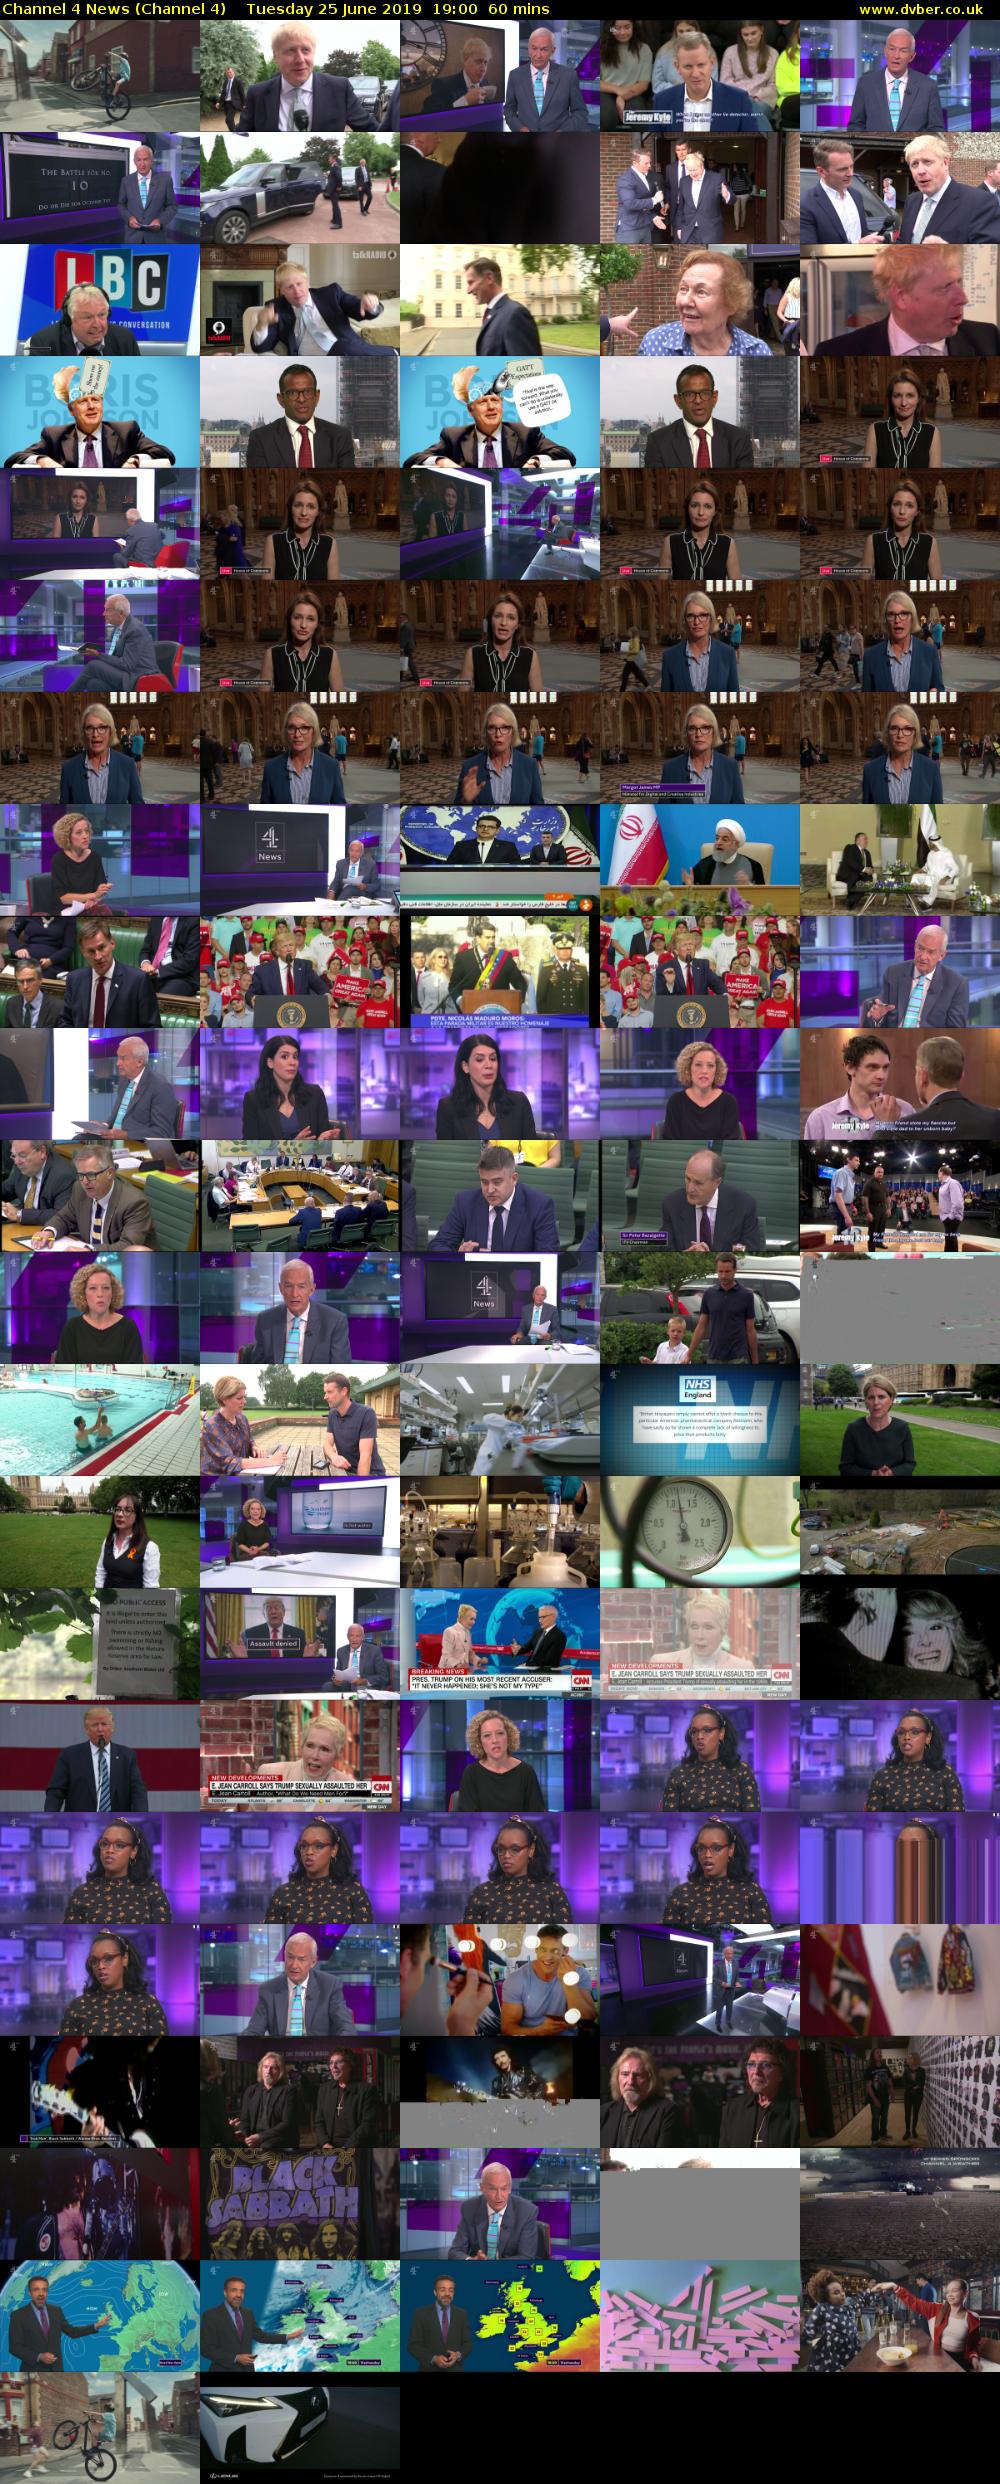 Channel 4 News (Channel 4) Tuesday 25 June 2019 19:00 - 20:00